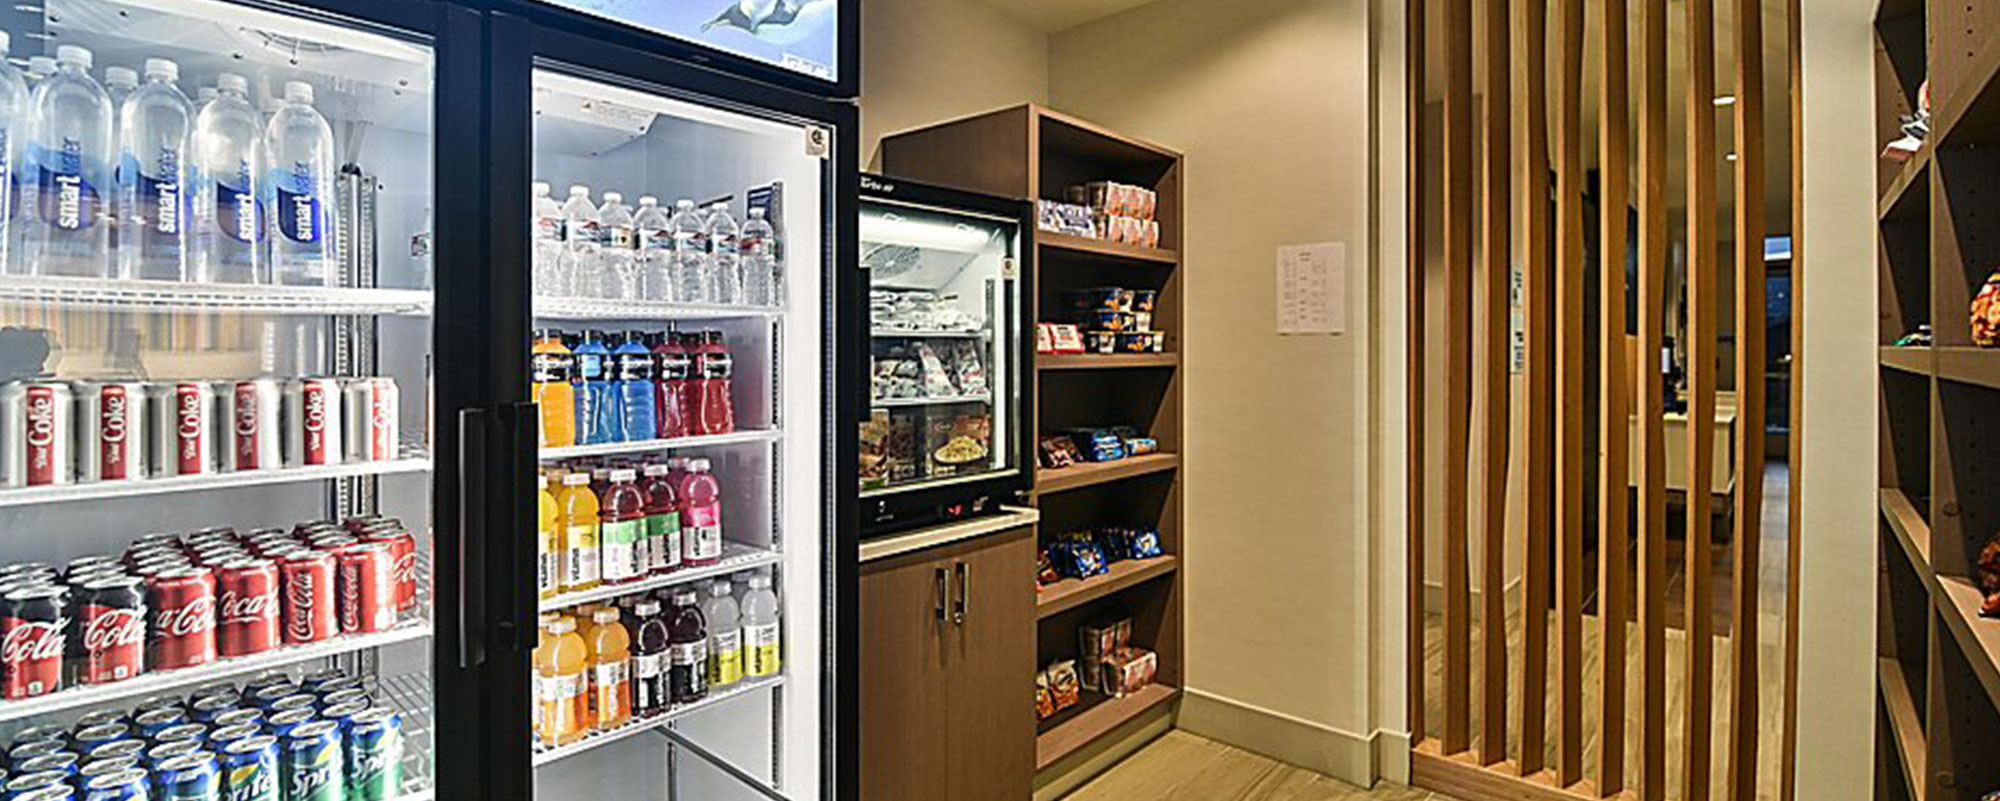 Hotel Pantry and Healthy Vending in Salt Lake City and Phoenix ...